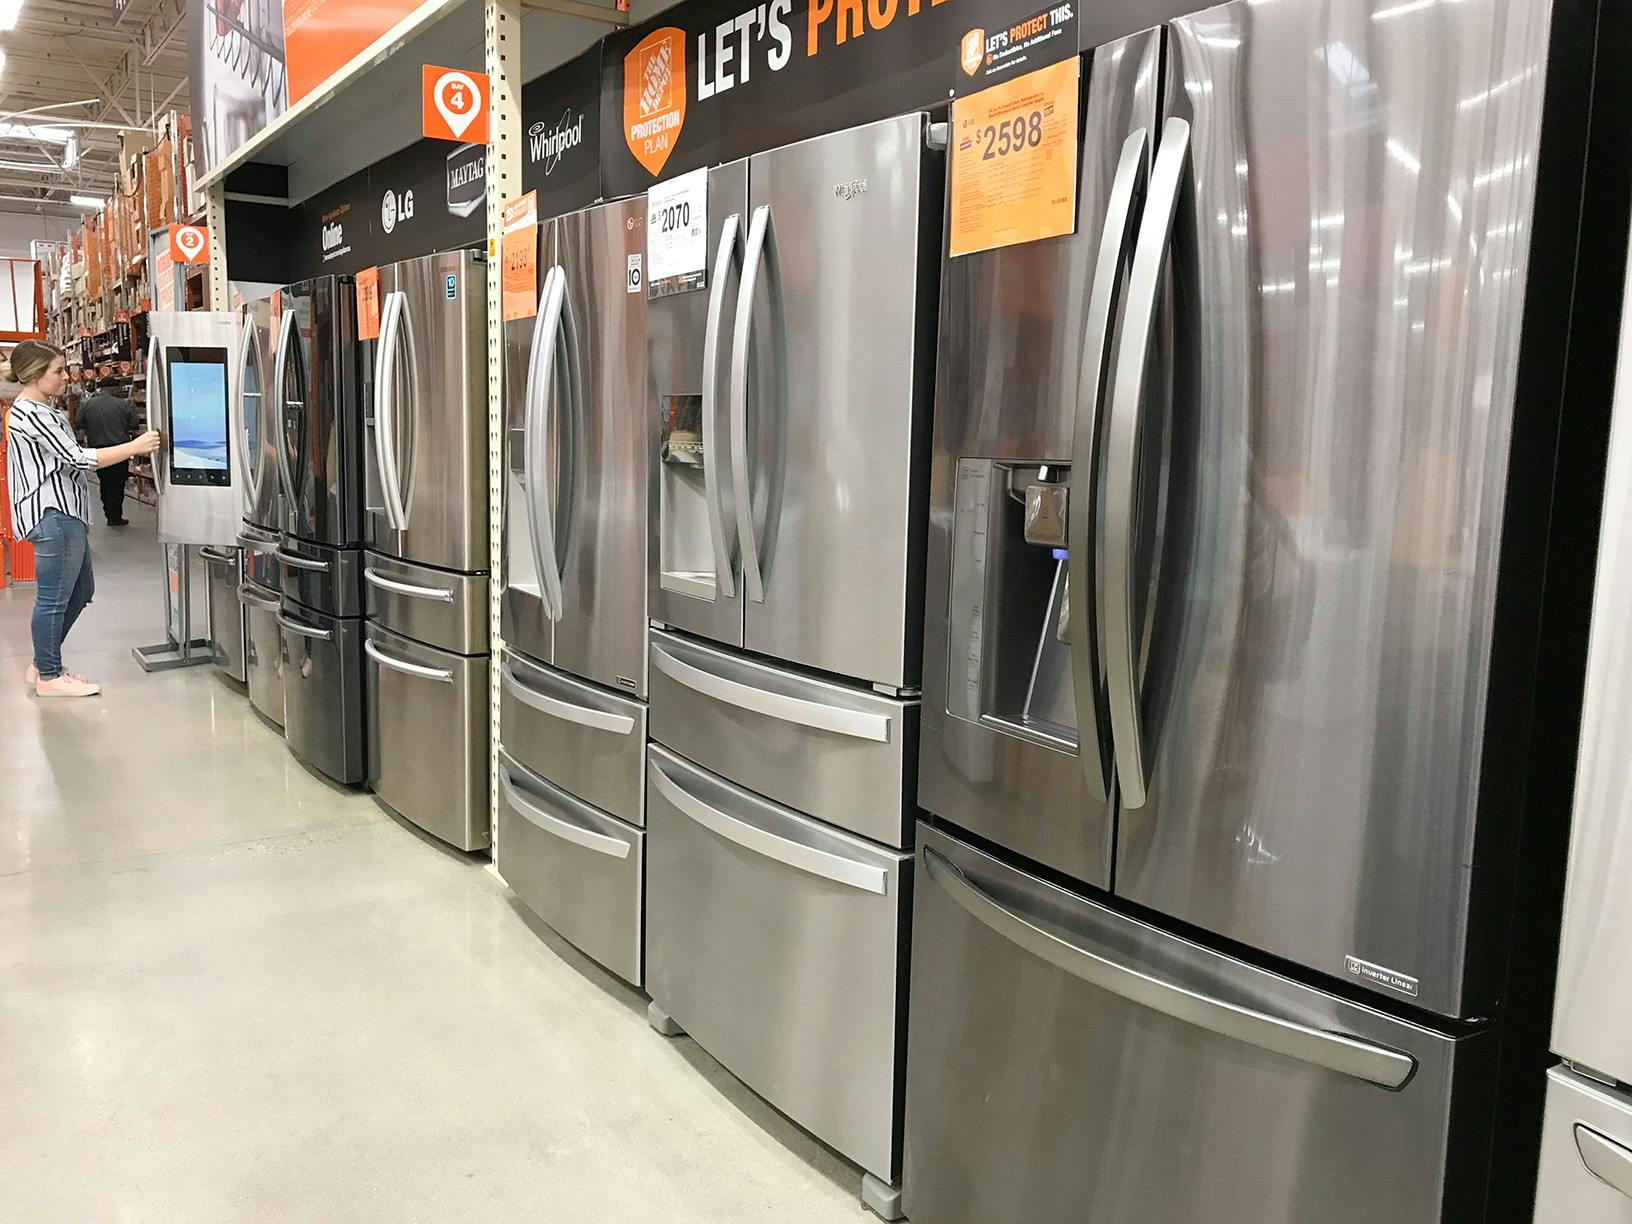 Https Thekrazycouponladycom 2019 11 06 Early Black Friday At Home Depot Save On Large Kitchen Appliances